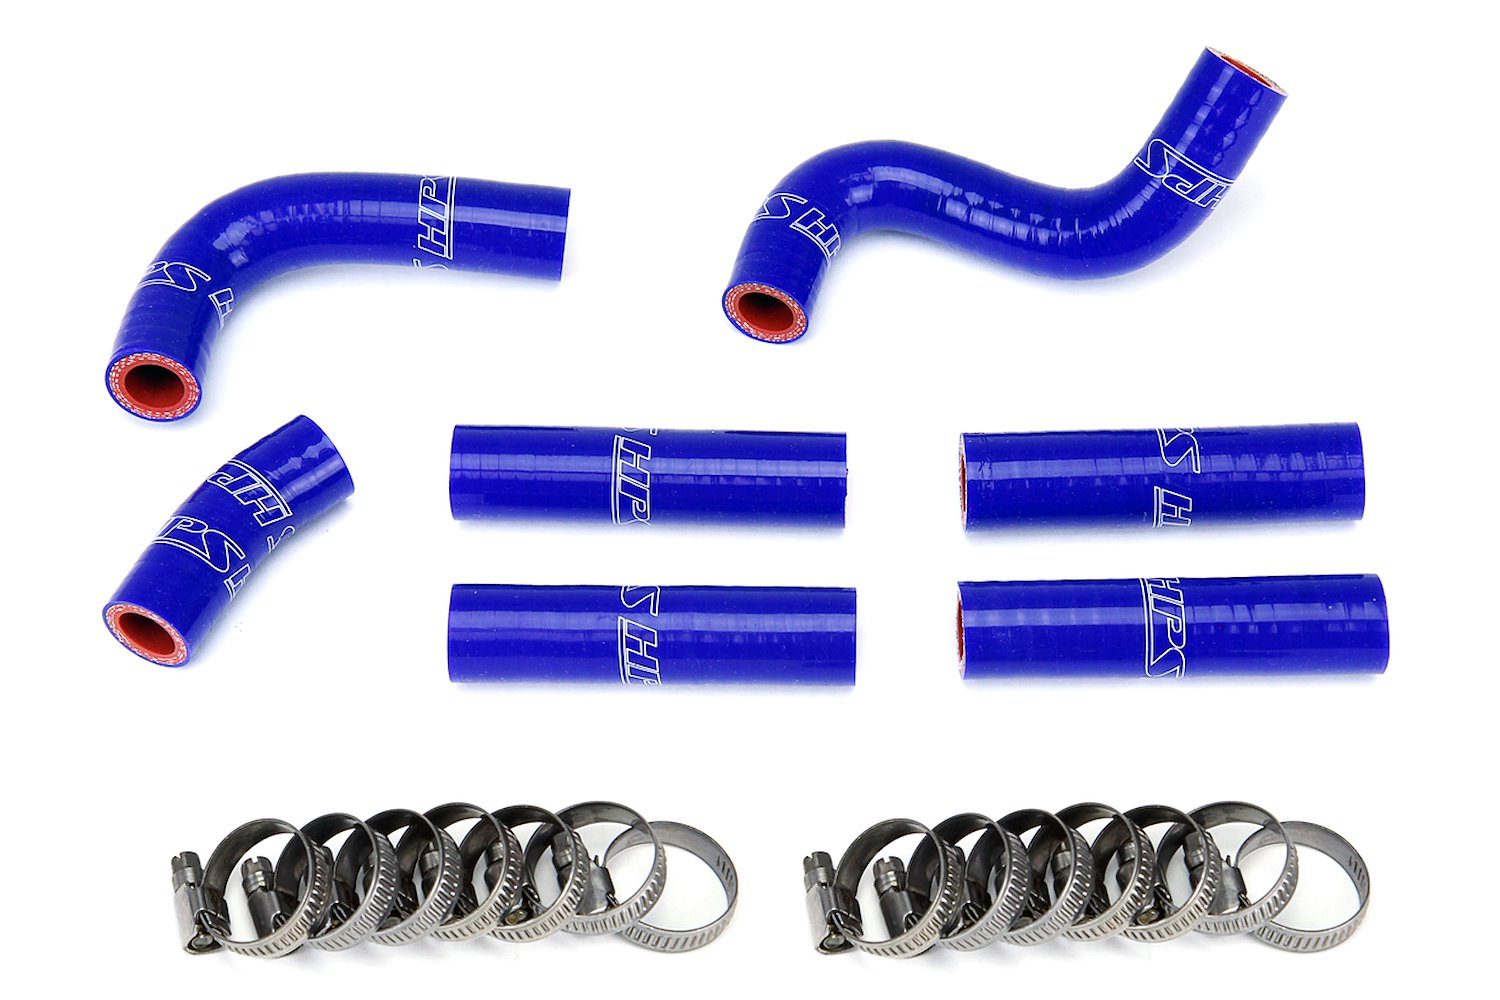 57-1344-BLUE Heater Hose Kit, High-Temp 3-Ply Reinforced Silicone, Replace OEM Rubber Heater Coolant Hoses